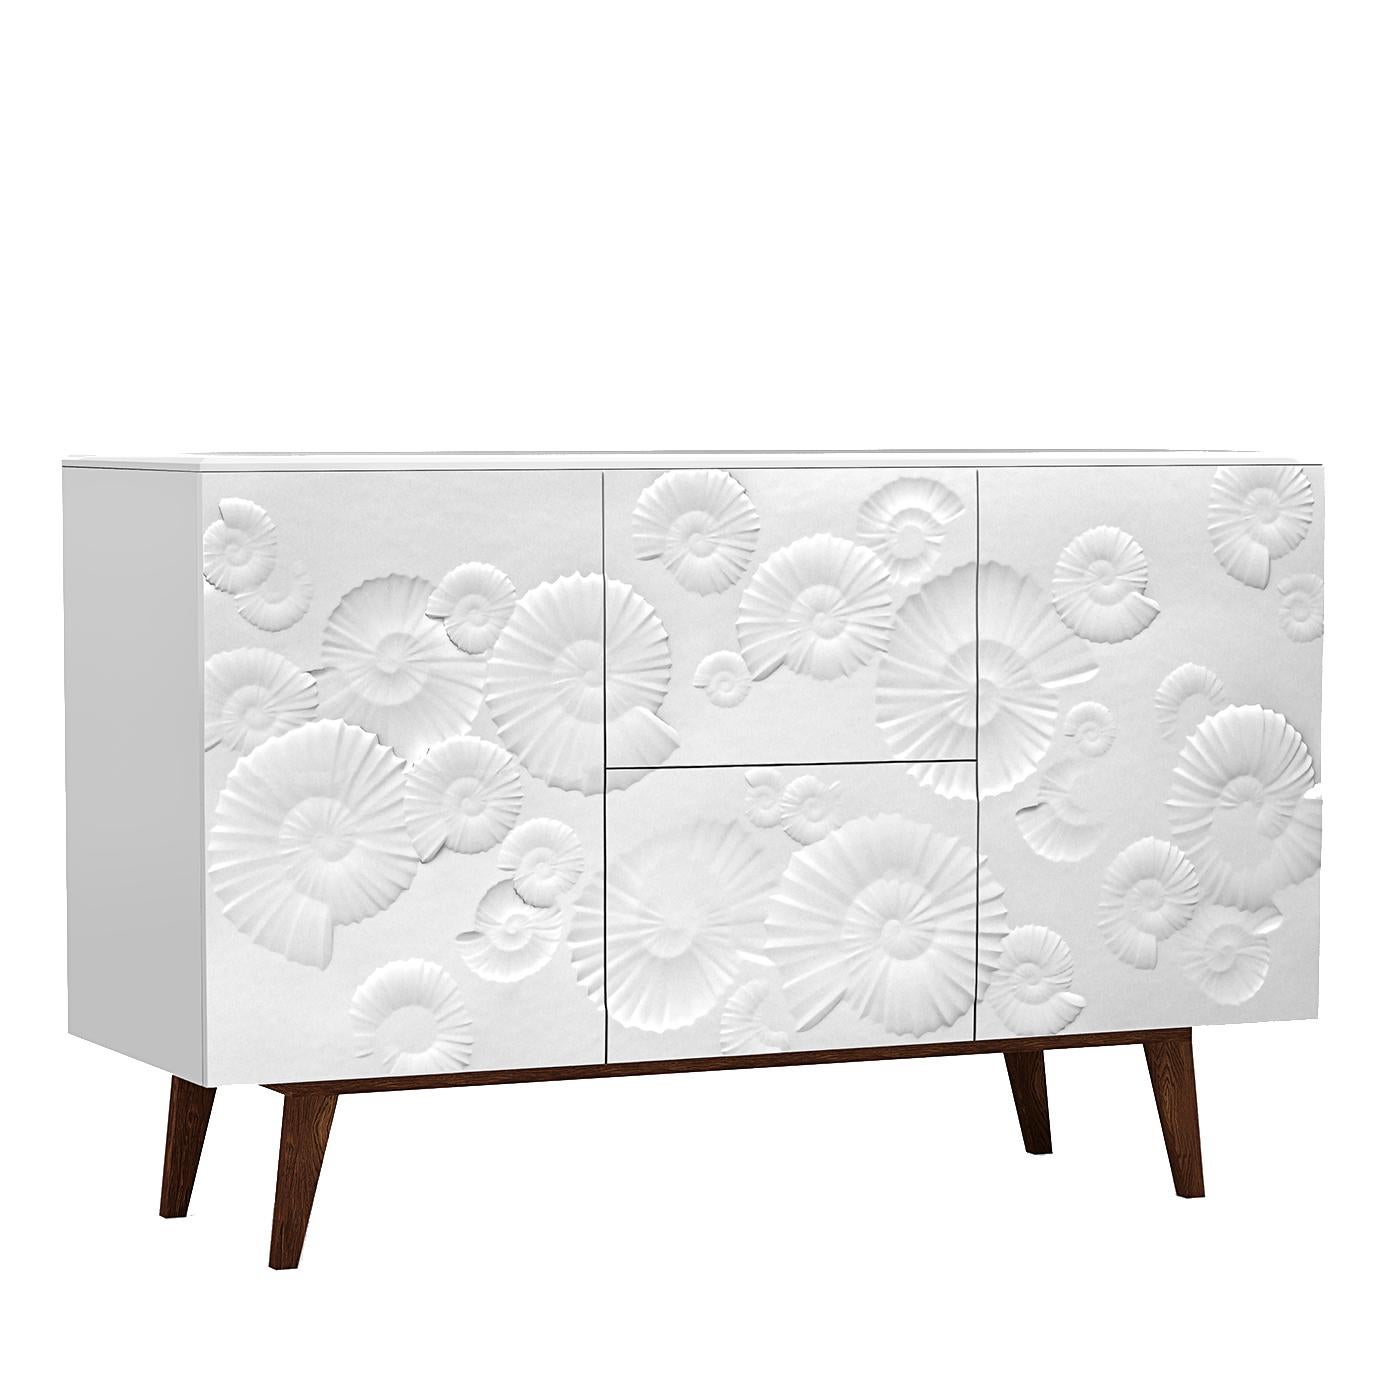 A stunning addition to both a Classic and a contemporary home, this sideboard will make a sophisticated statement in a living room or dining room, providing also precious storage space. The two lateral doors and two central drawers feature panels